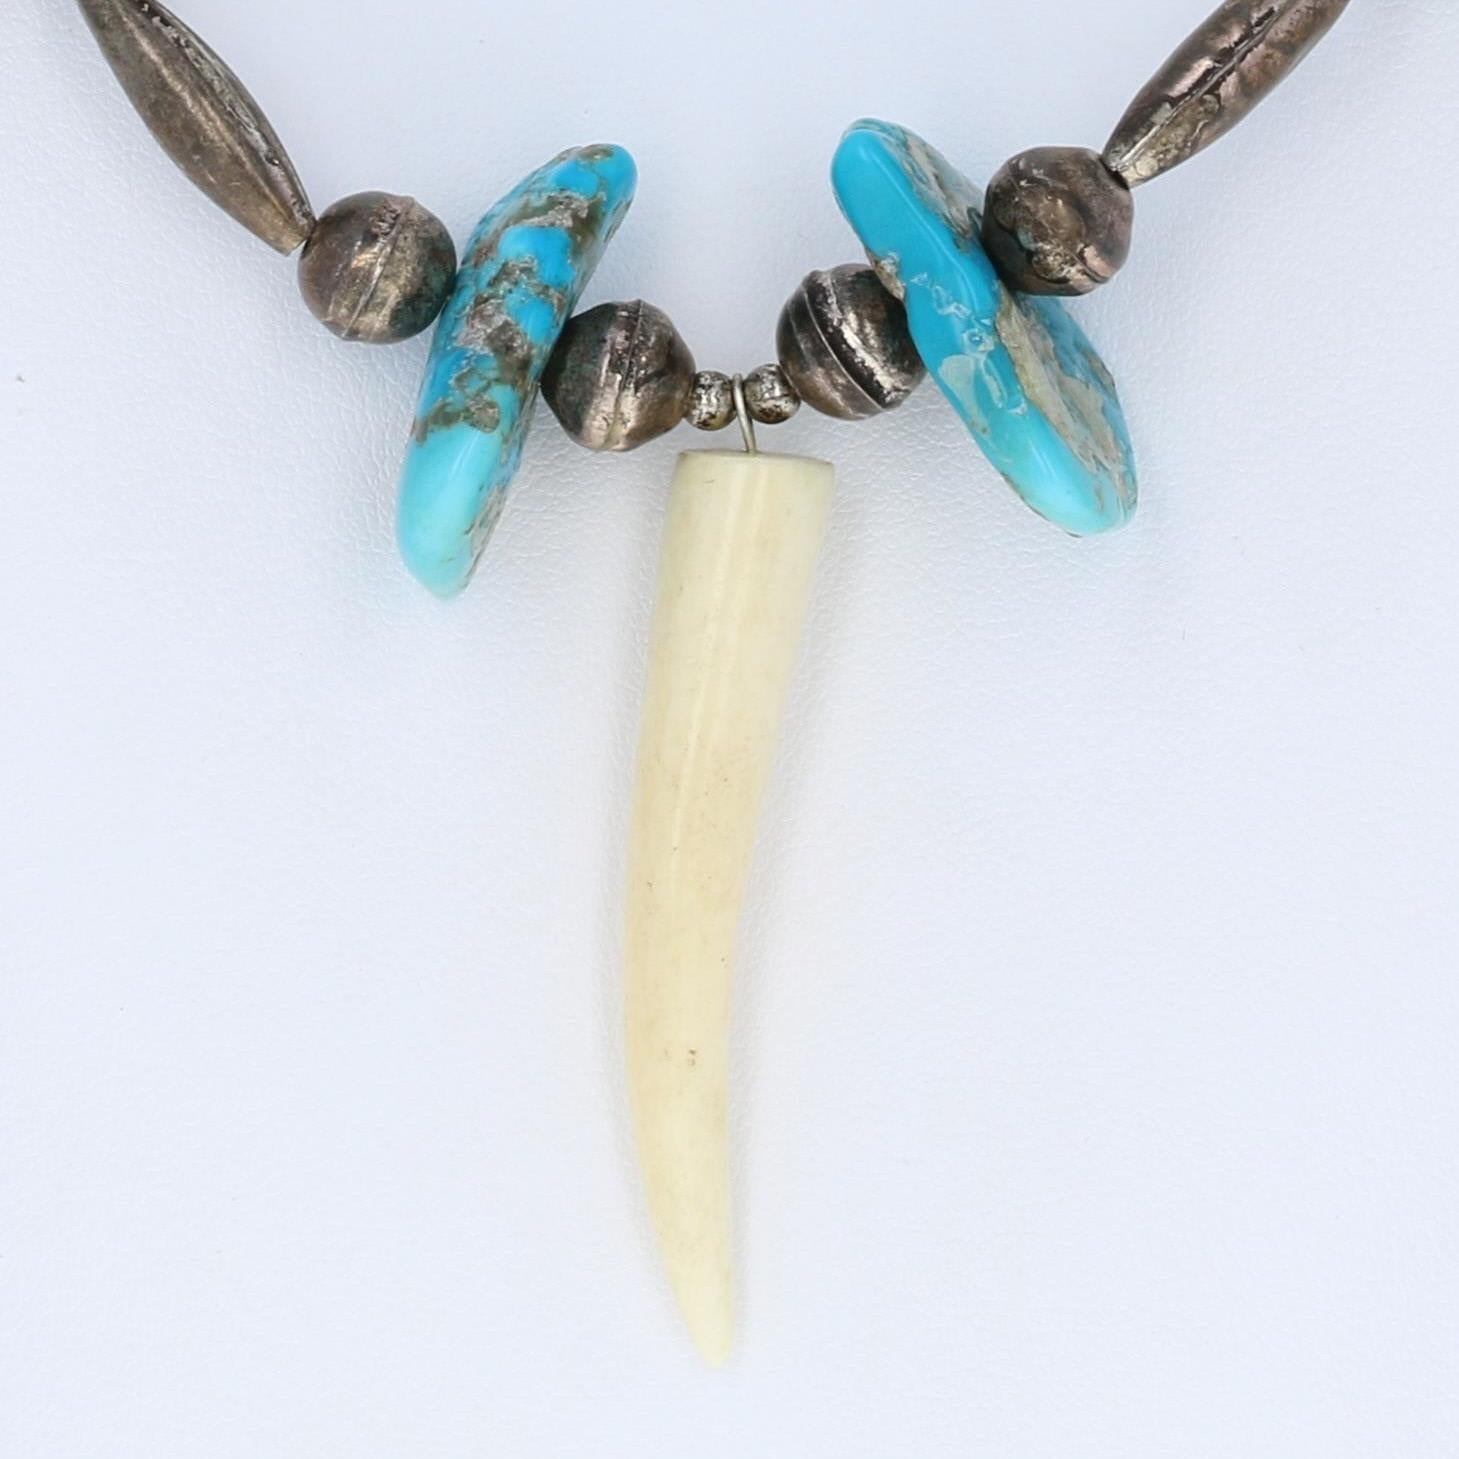 Native American 
Metal Content: Guaranteed Sterling Silver as tested

Stone Information:
Genuine Turquoise - 
Treatment: Routinely Enhanced

Genuine Shell - 

Genuine Coral -

Material Information:  
Deer Bone - 

Deer Antler - 

Chain Style: Beaded